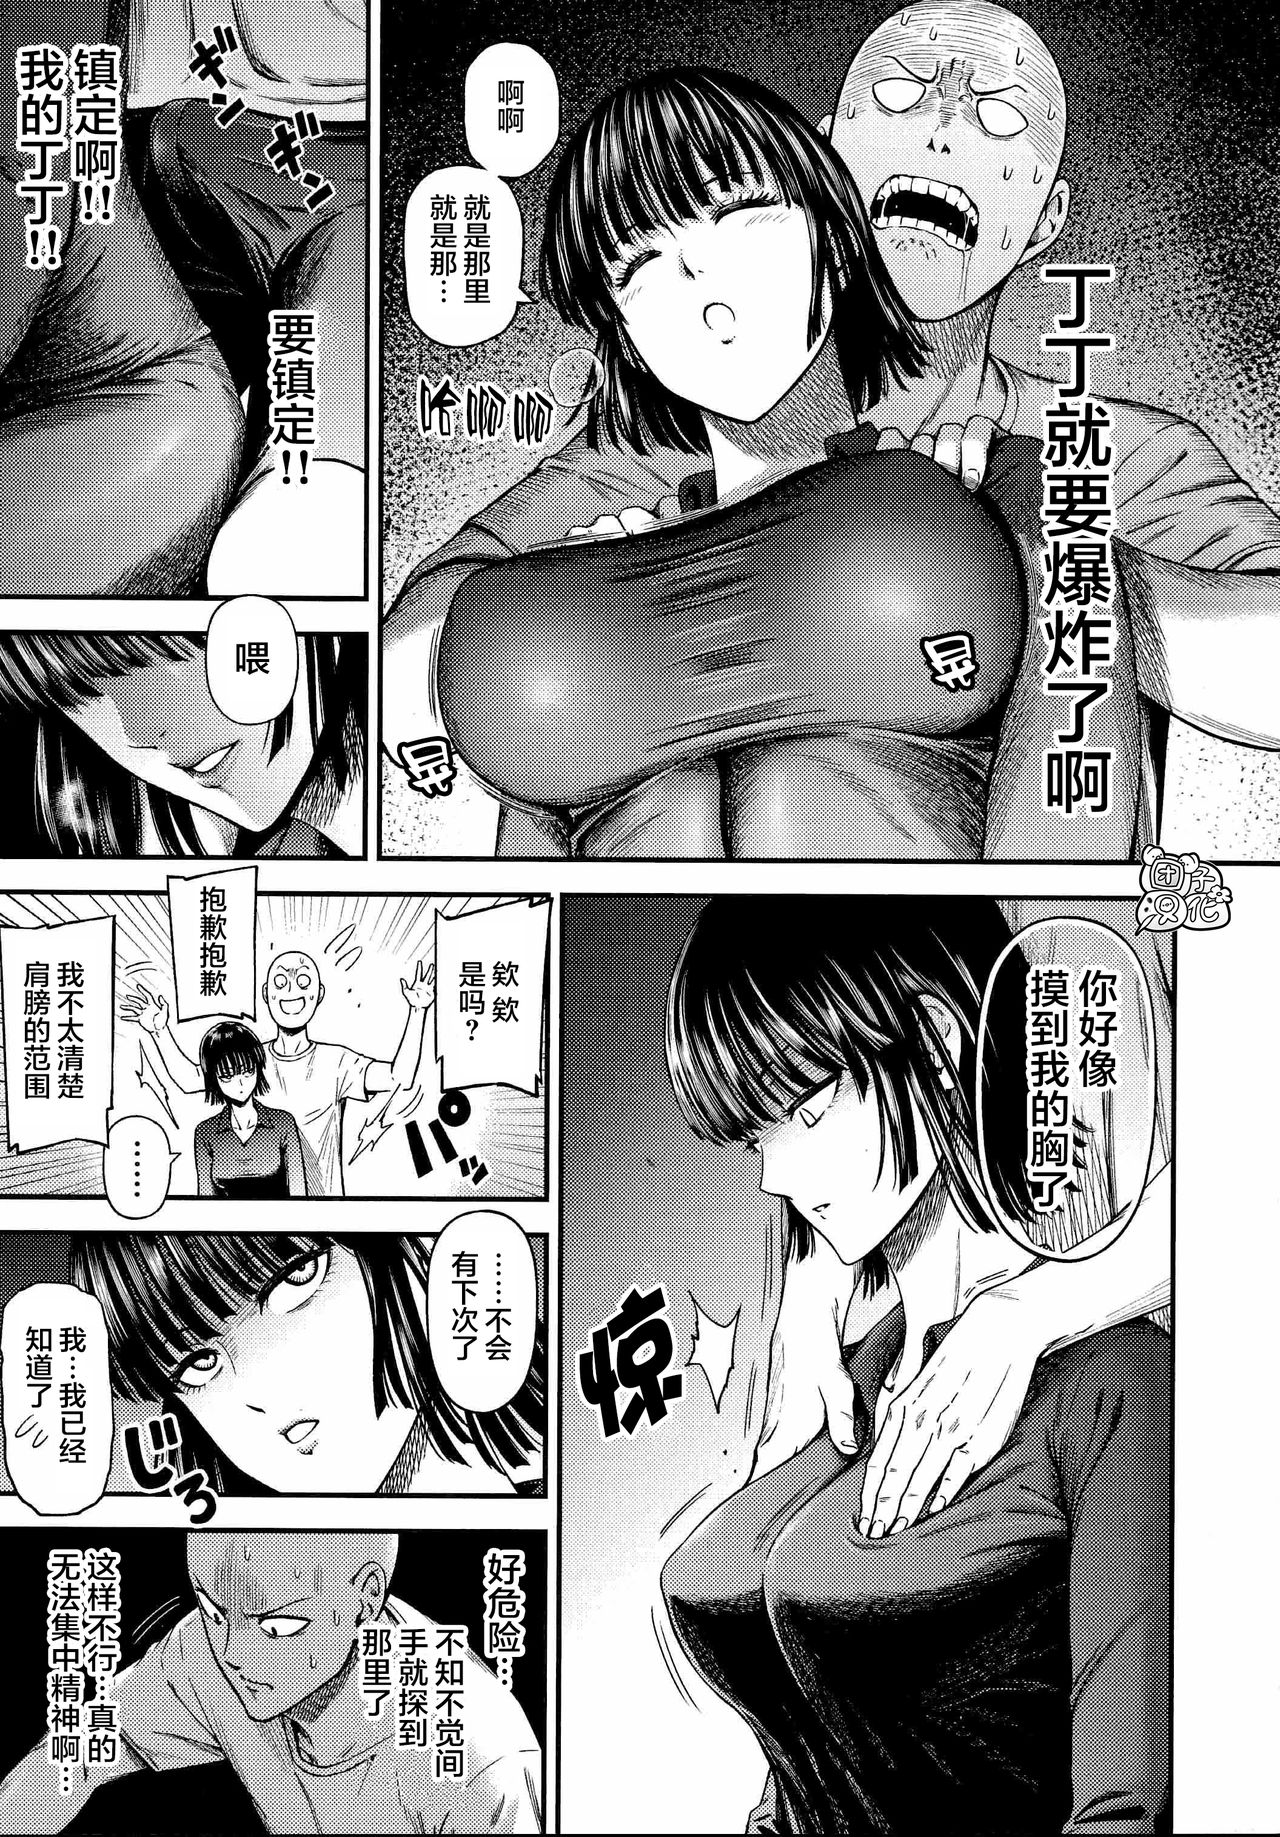 [Kiyosumi Hurricane (Kiyosumi Hurricane)] ONE-HURRICANE (One Punch Man) page 10 full